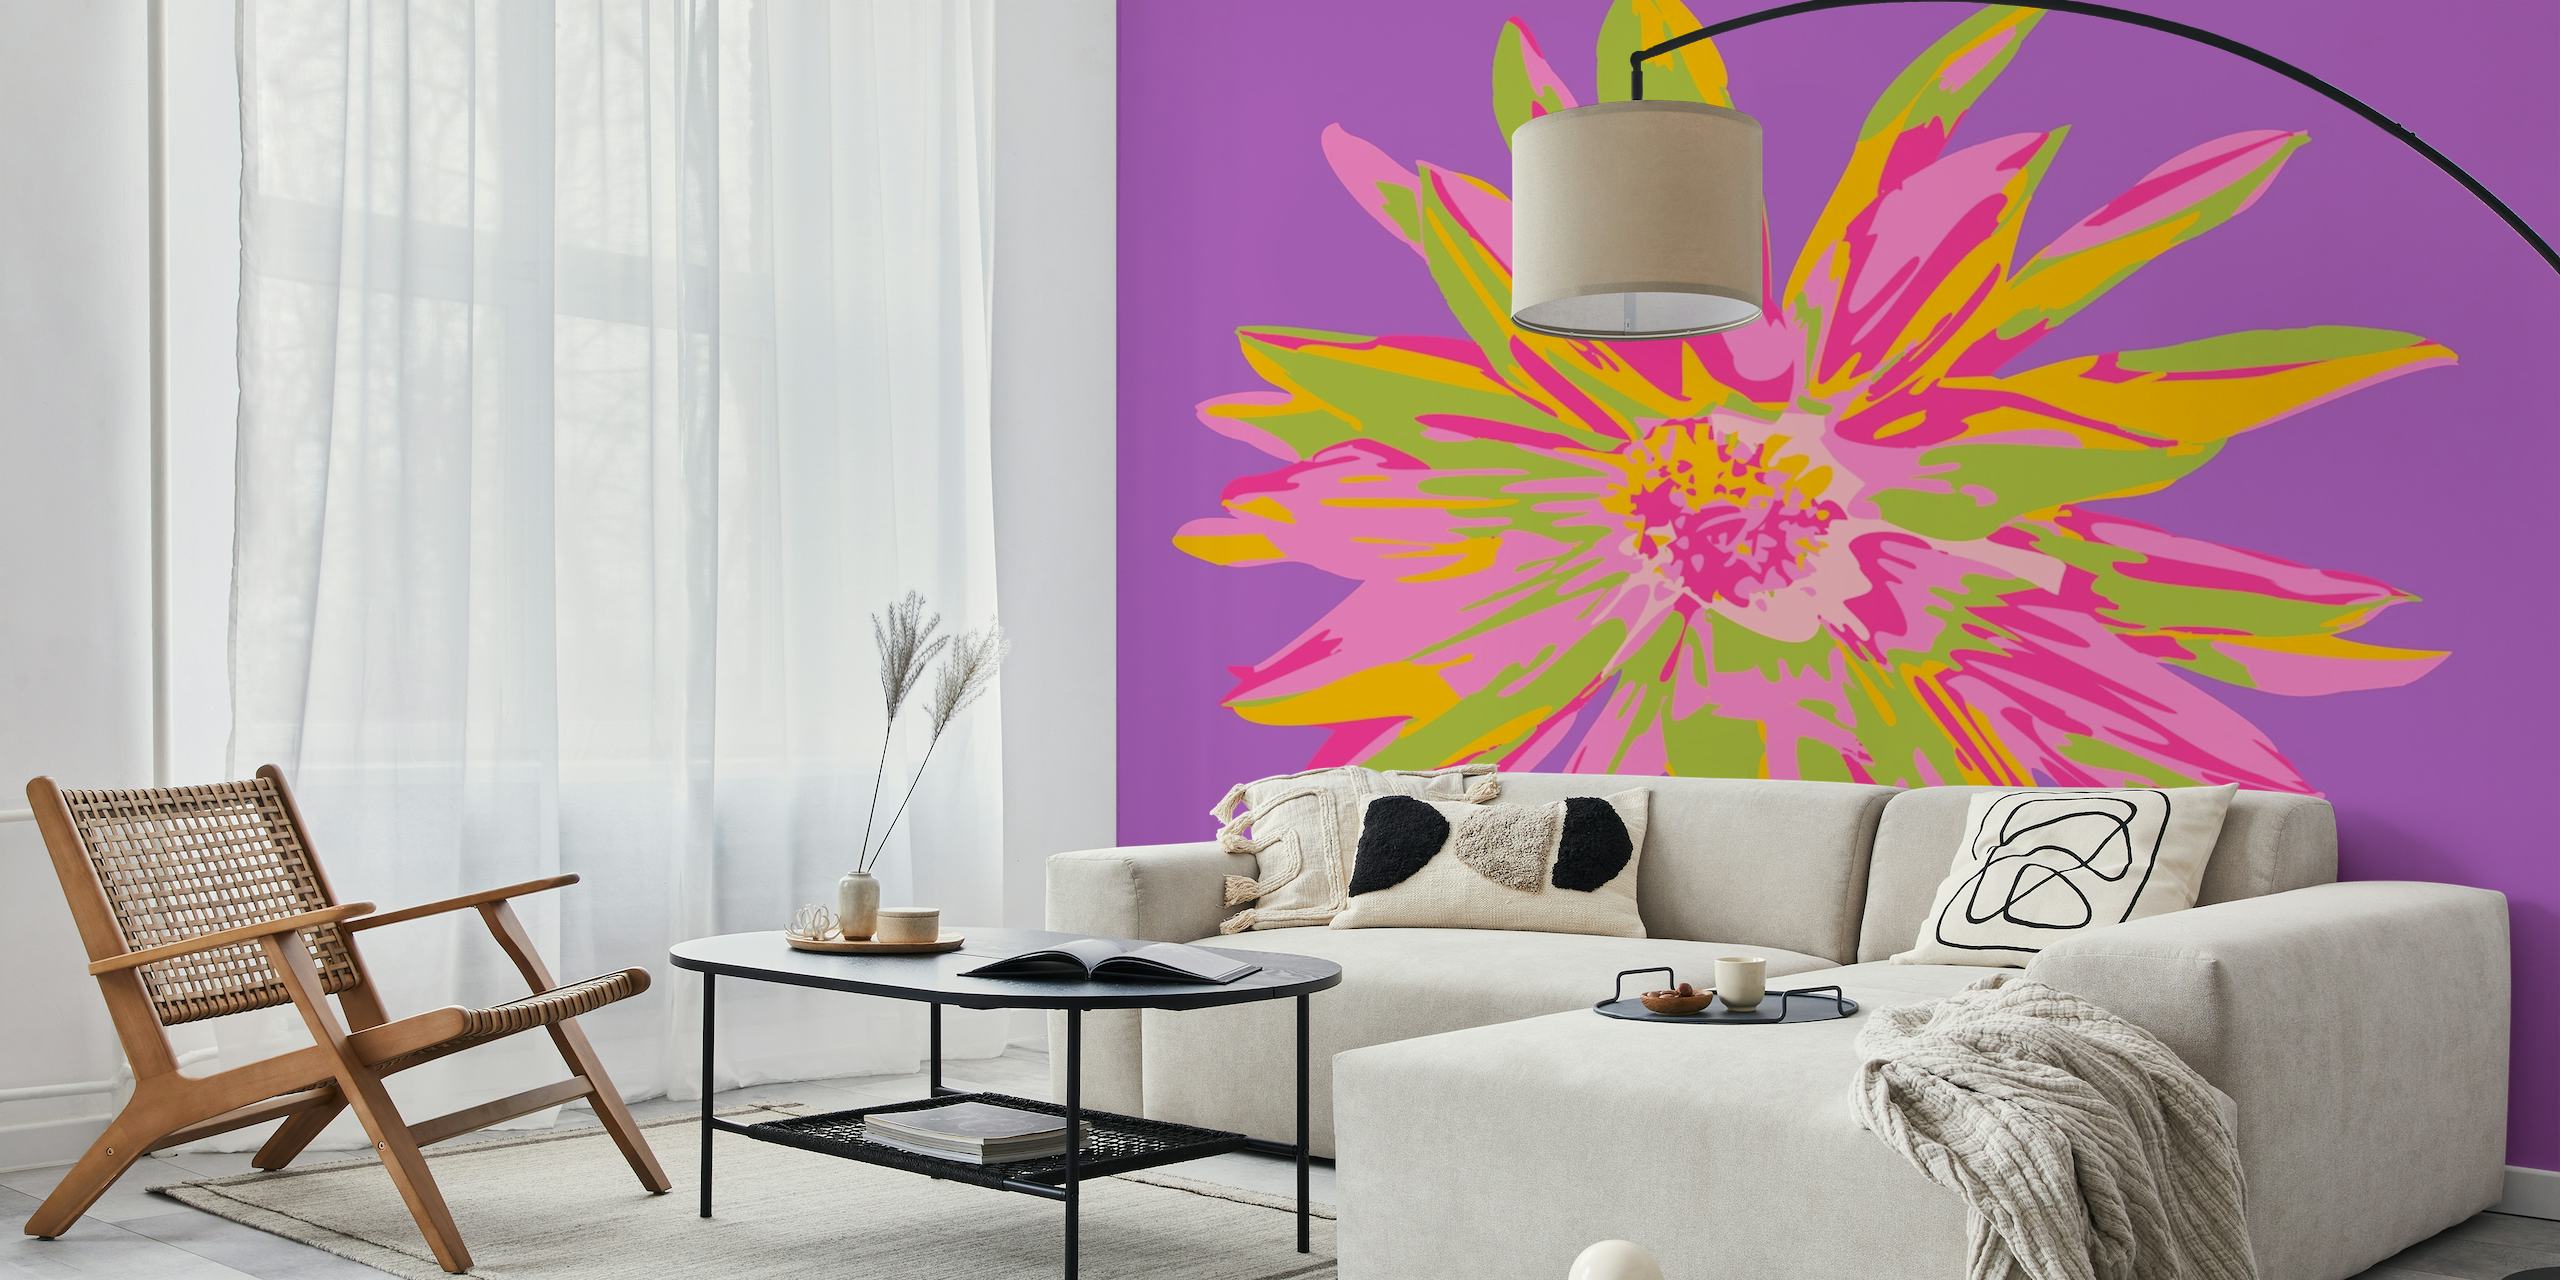 Abstract dahlia flower wall mural in violet, pink, and yellow tones on a purple background